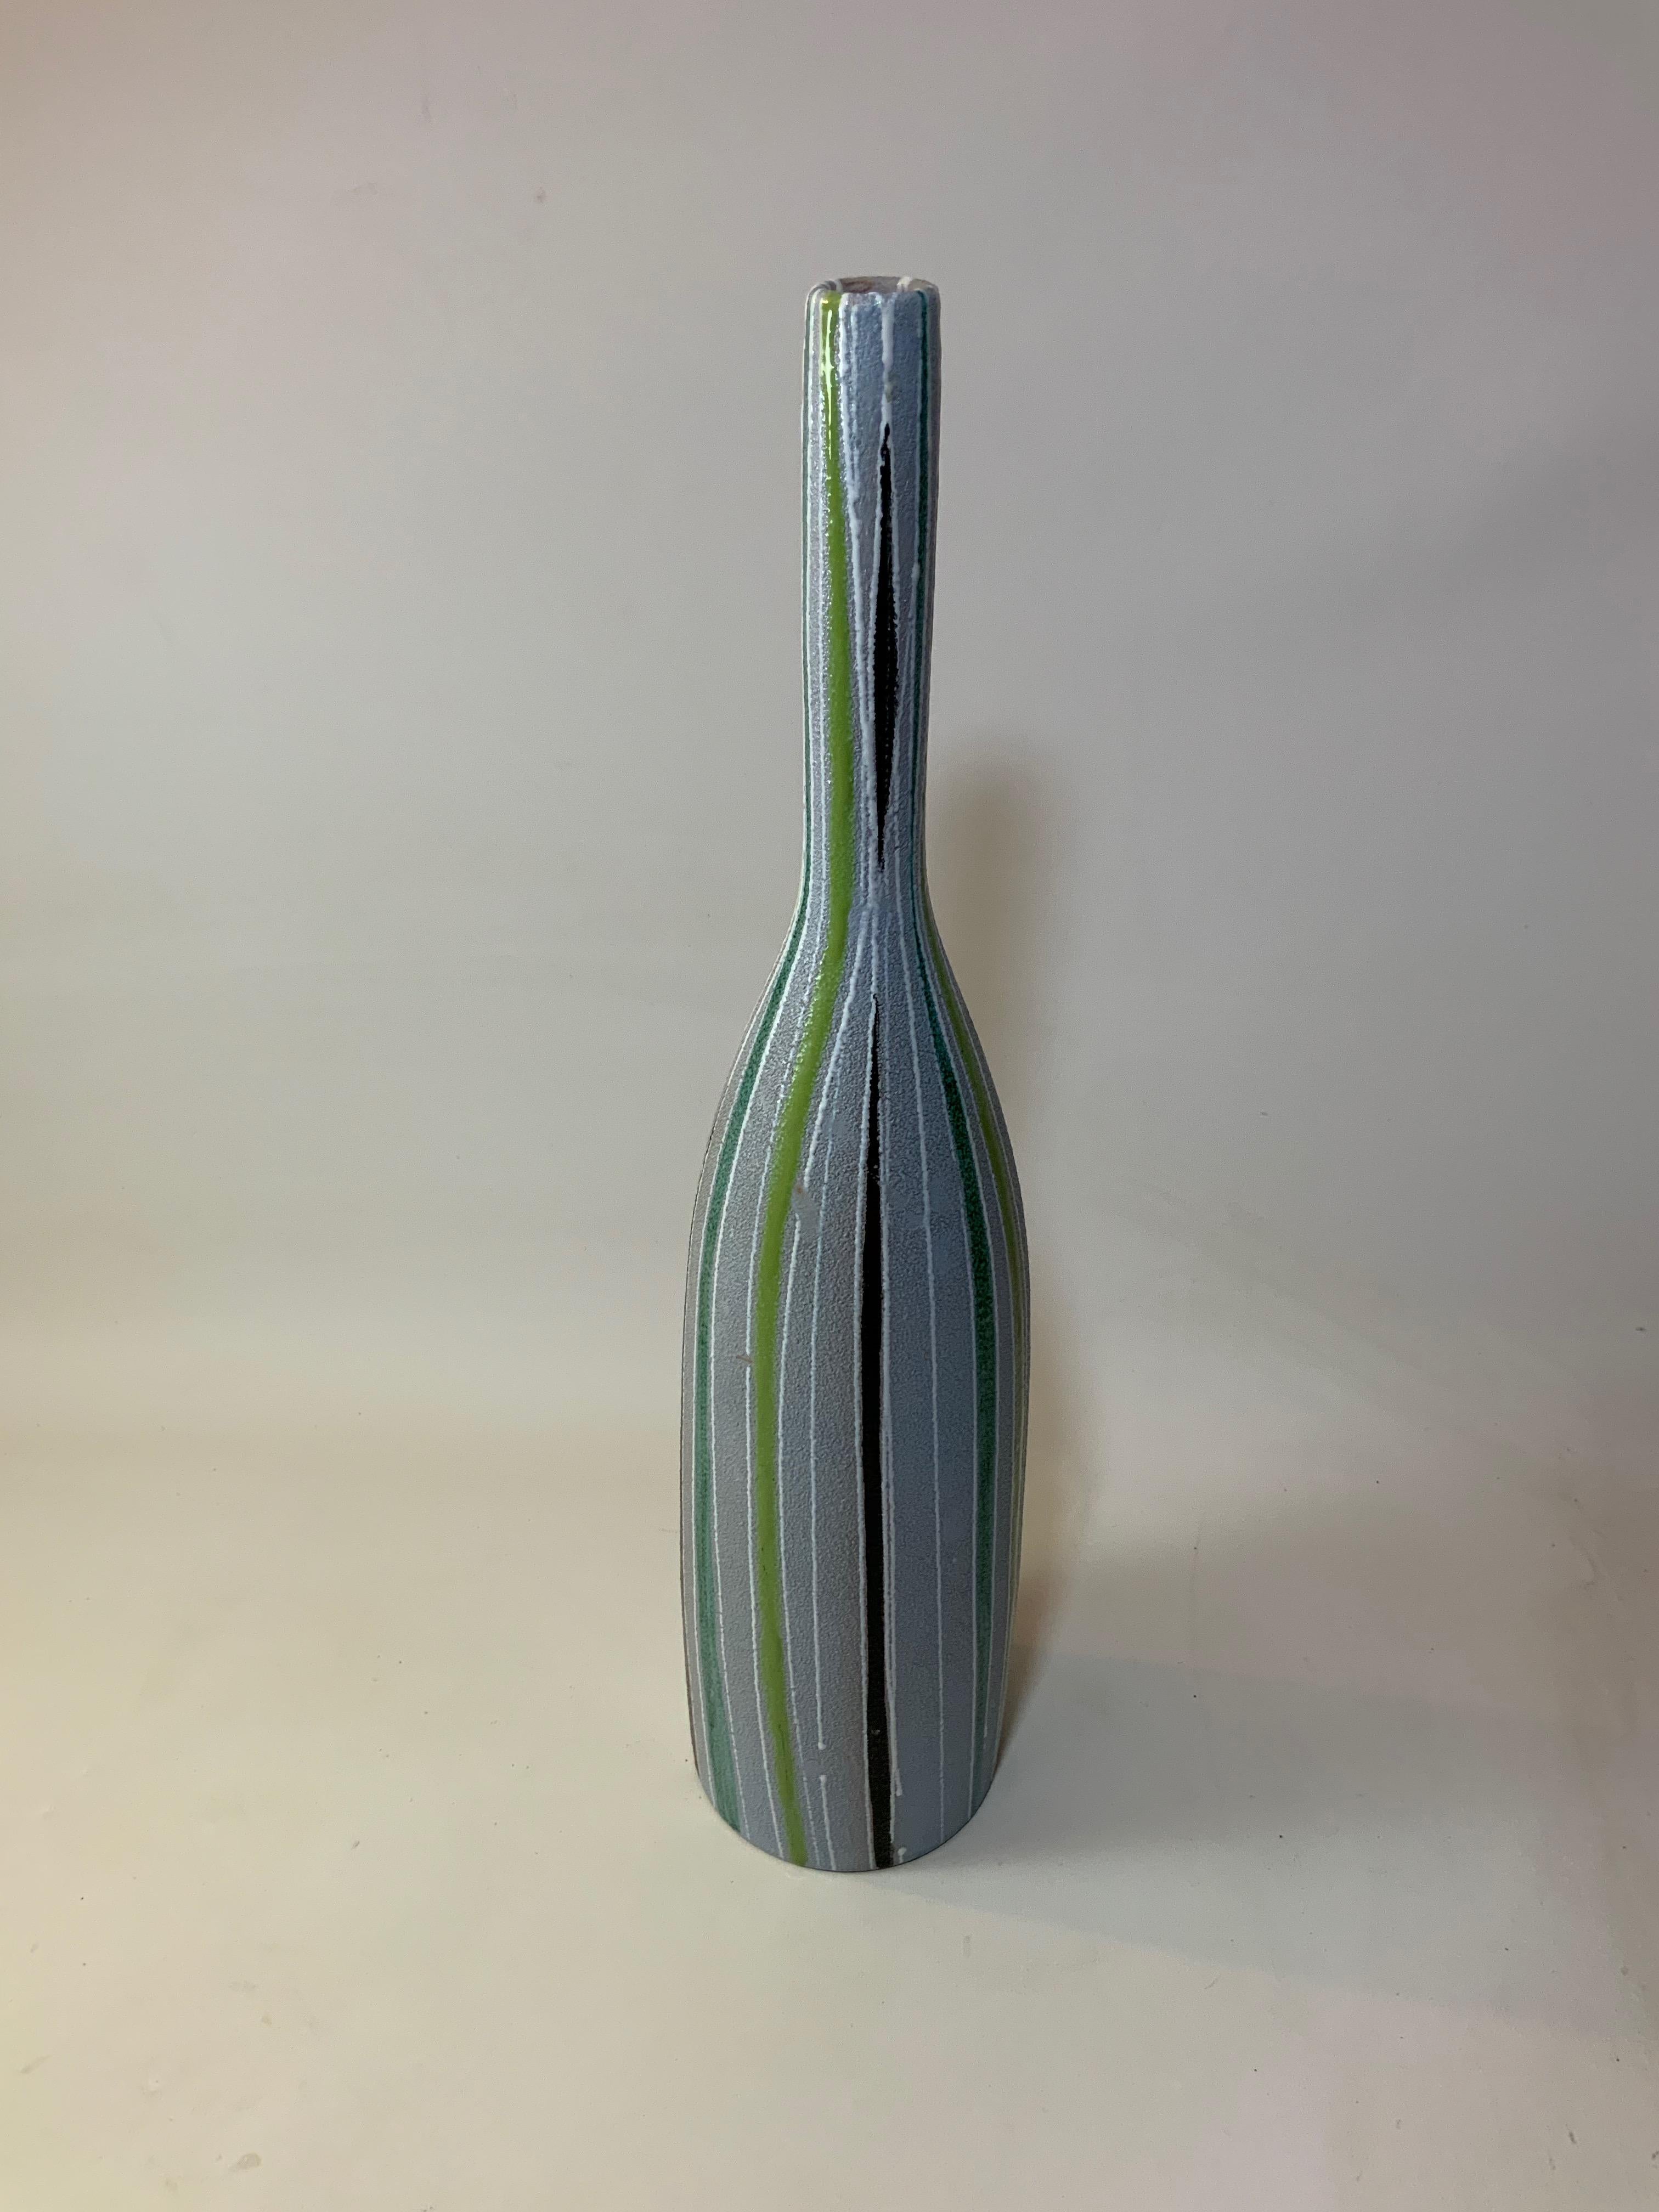 Fully signed Fratelli Fanciullacci for Raymor tall striped art pottery vase, circa 1950-1960. Very good condition with no visible hairlines, chips, crazing, cracks or restorations. There are some minor glaze misses produced in the manufacturing of